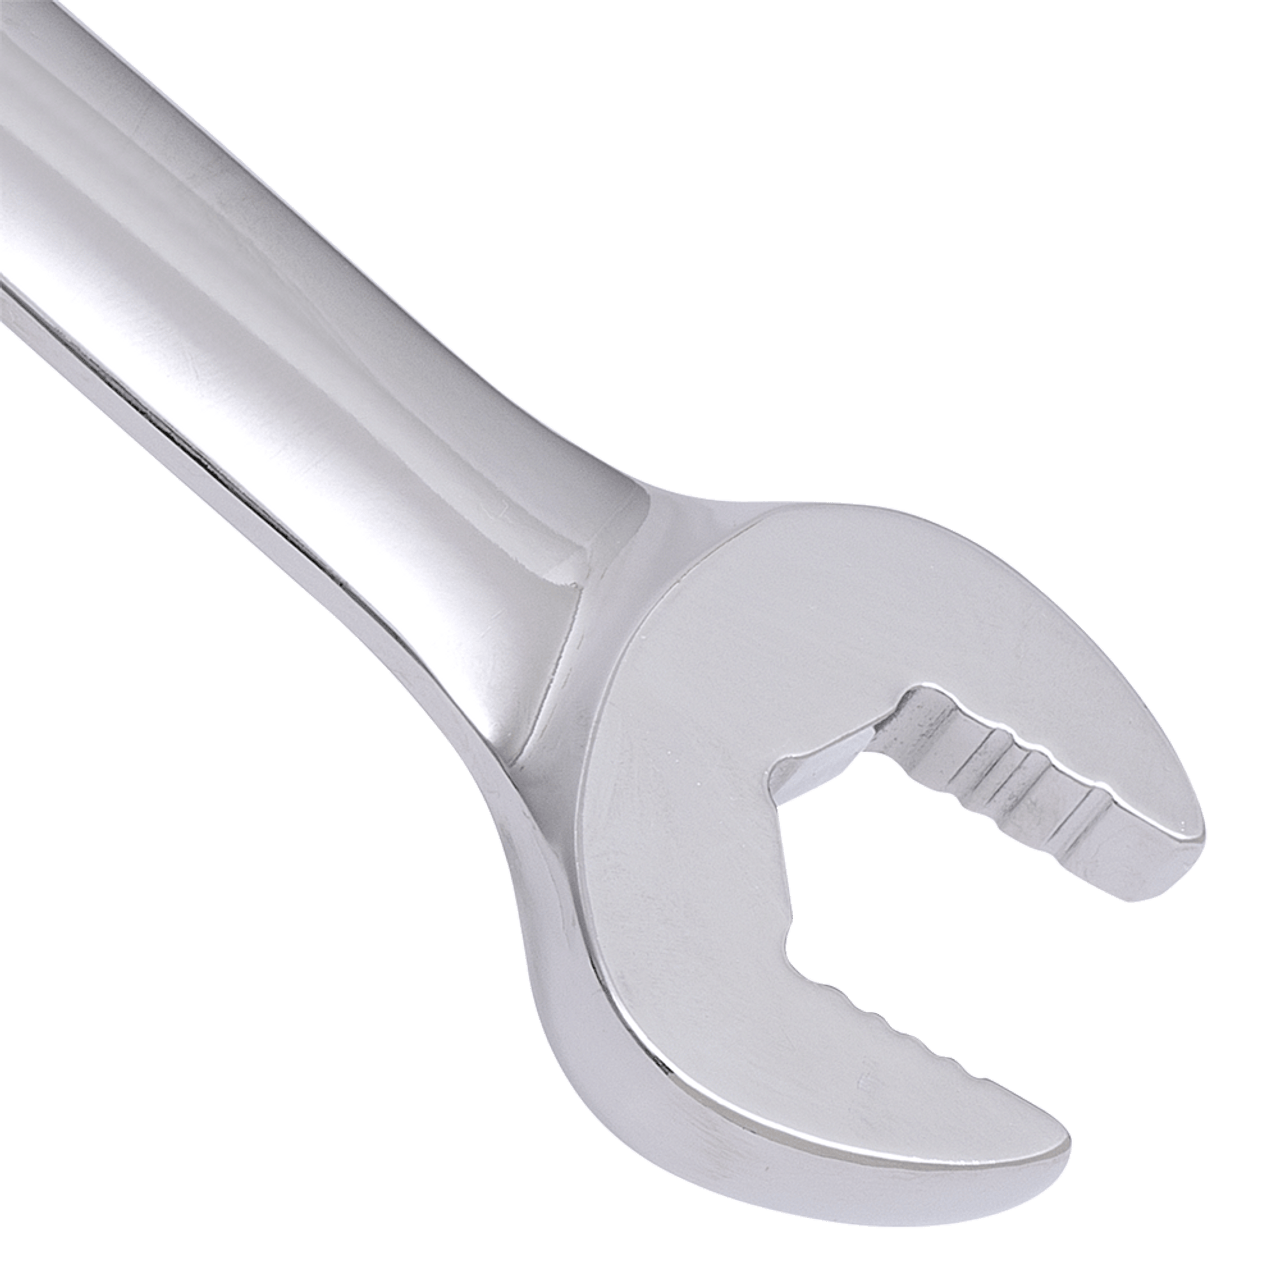 21mm Ratcheting Combination Wrench  701166